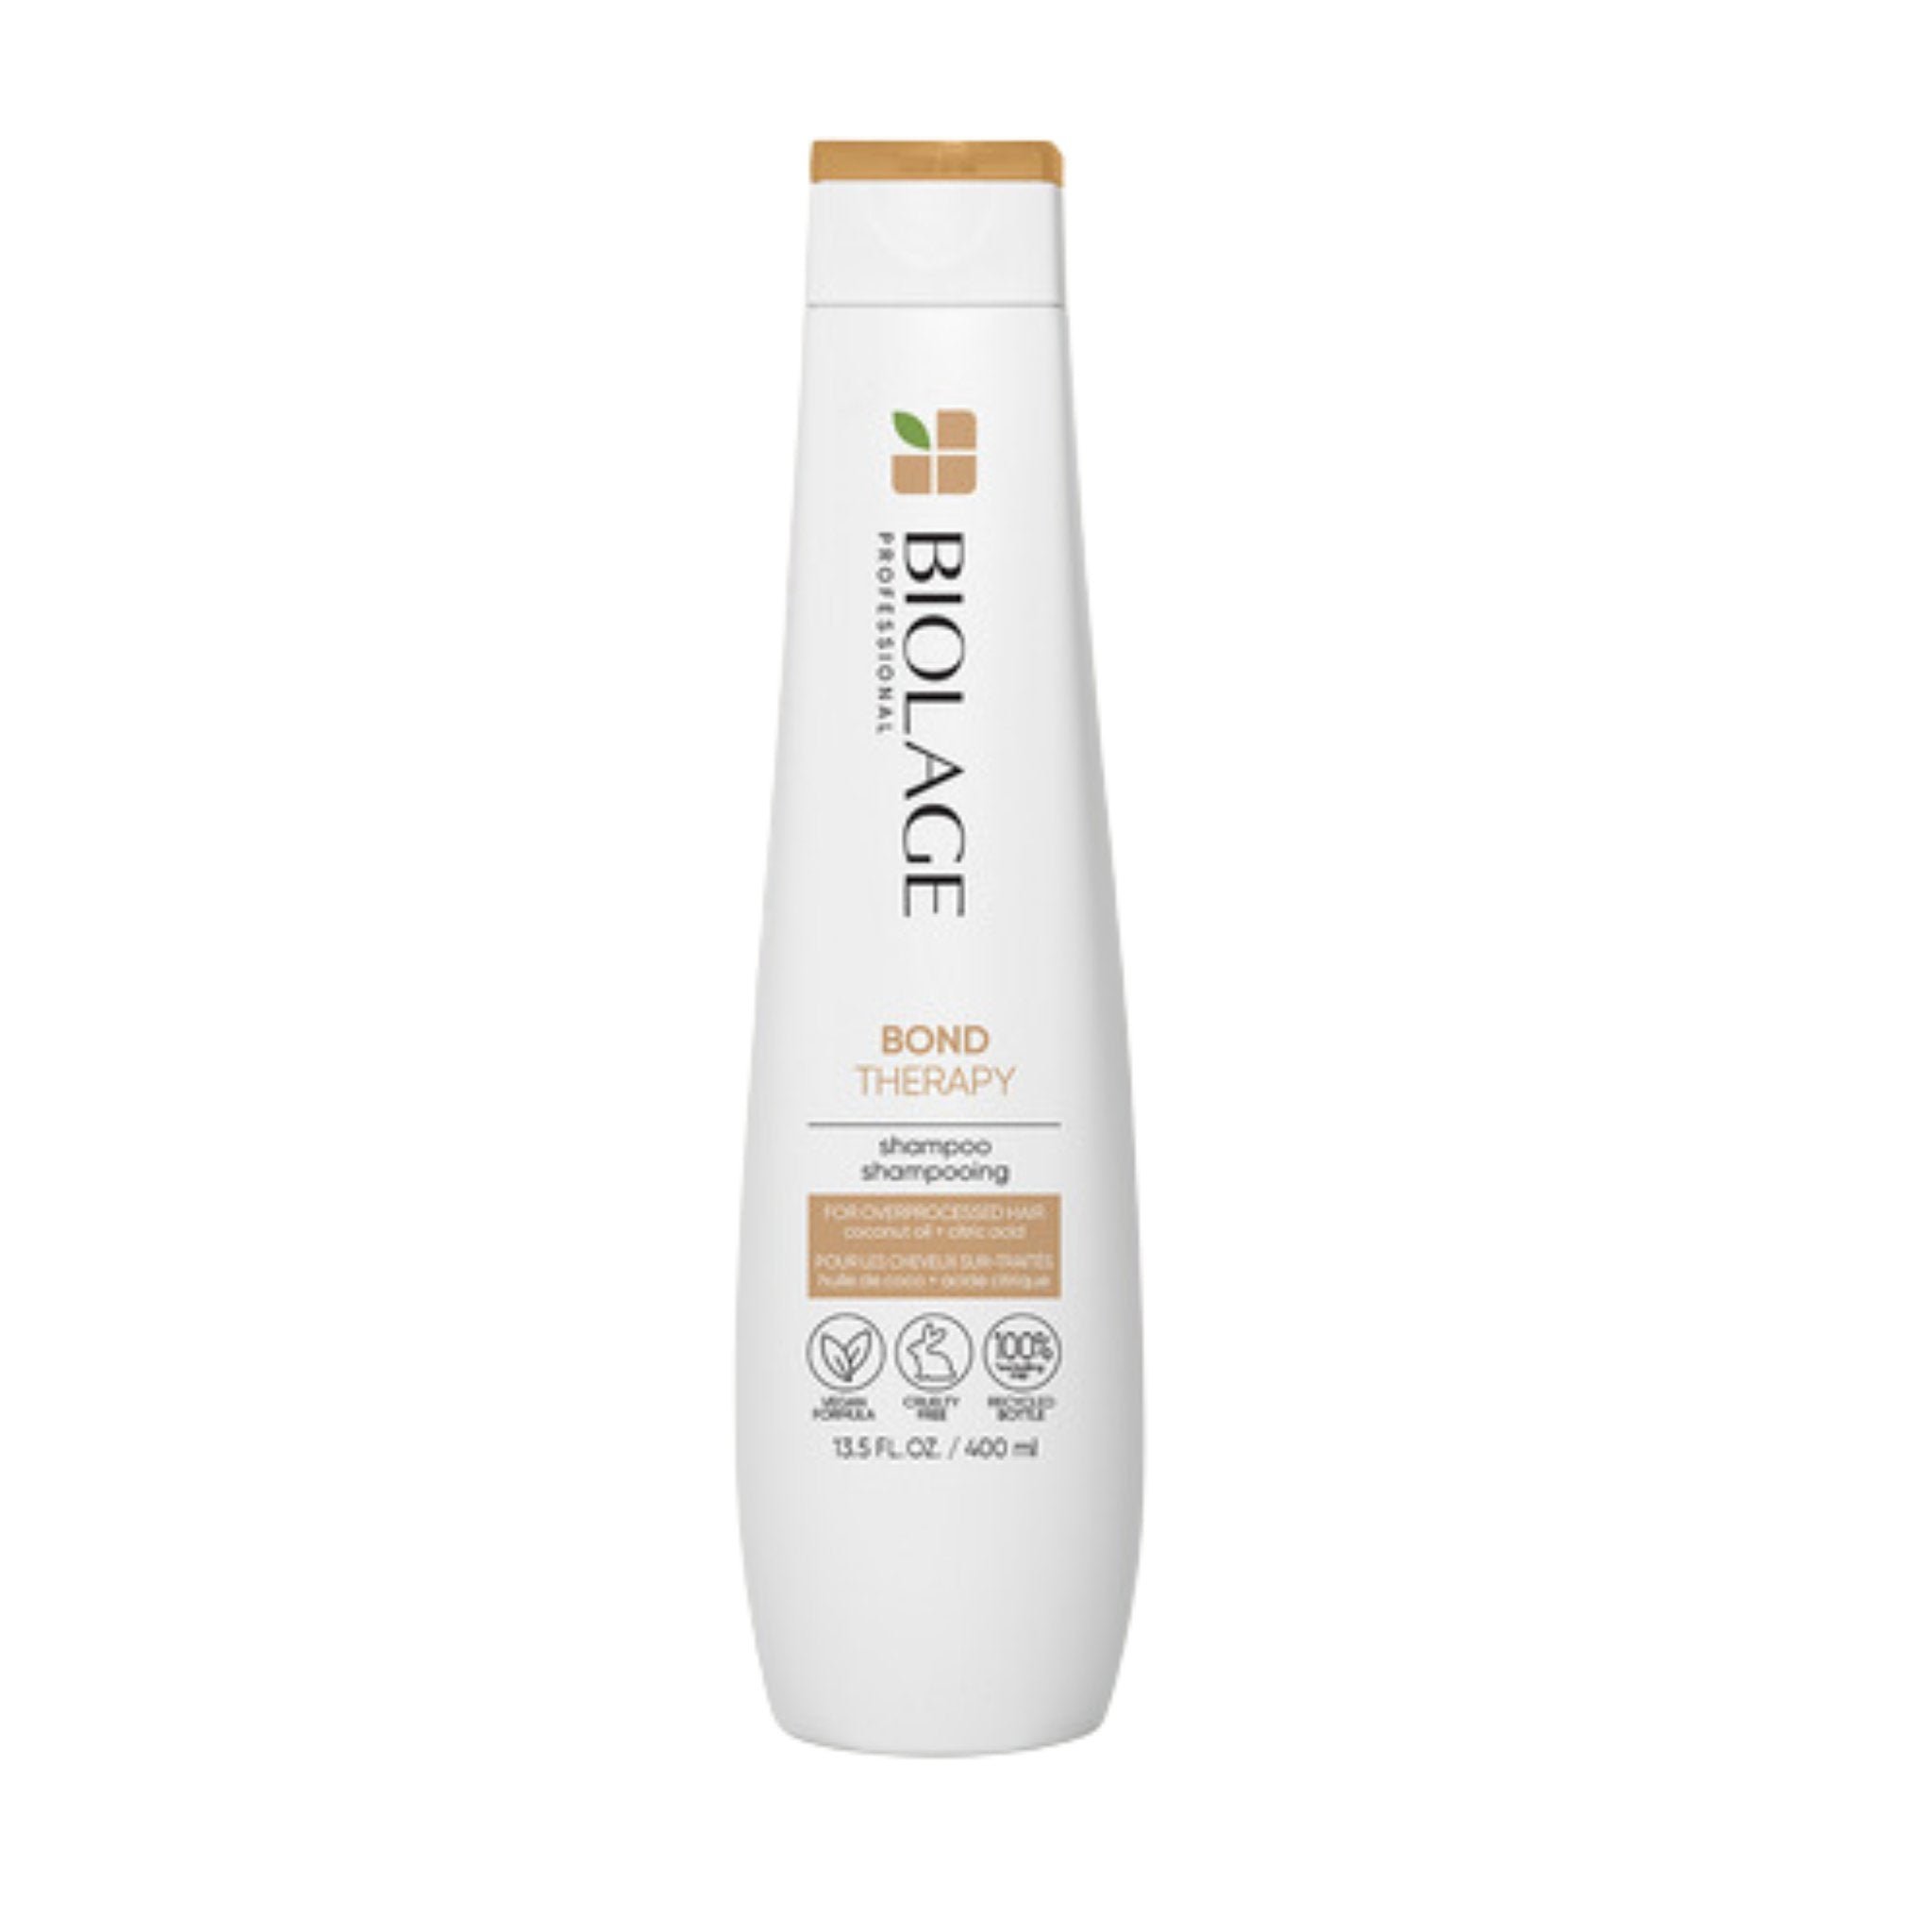 Biolage. Shampoing Bond Therapy - 400 ml - Concept C. Shop